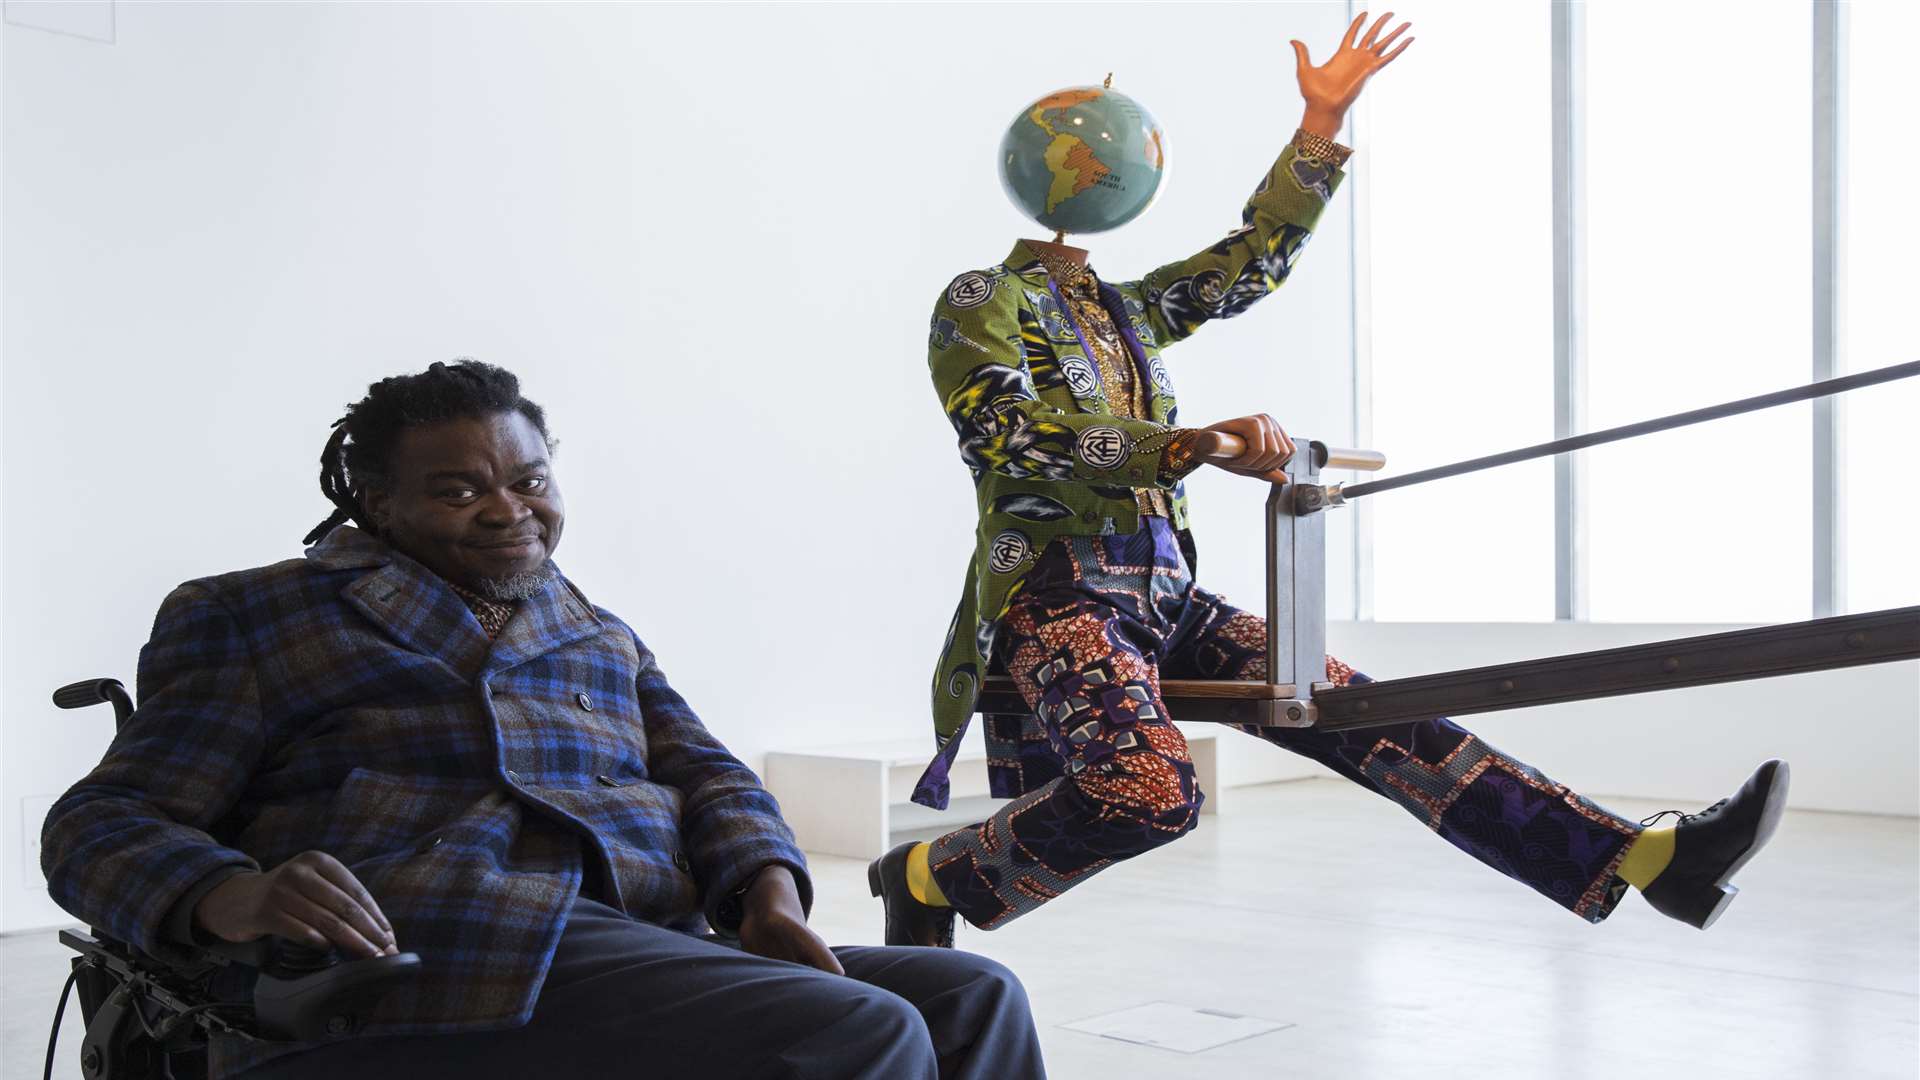 Yinka Shonibare in front of new work End of Empire, 2016 on show at Turner Contemporary. Photo: John Phillips/Getty Images for 14-18 NOW